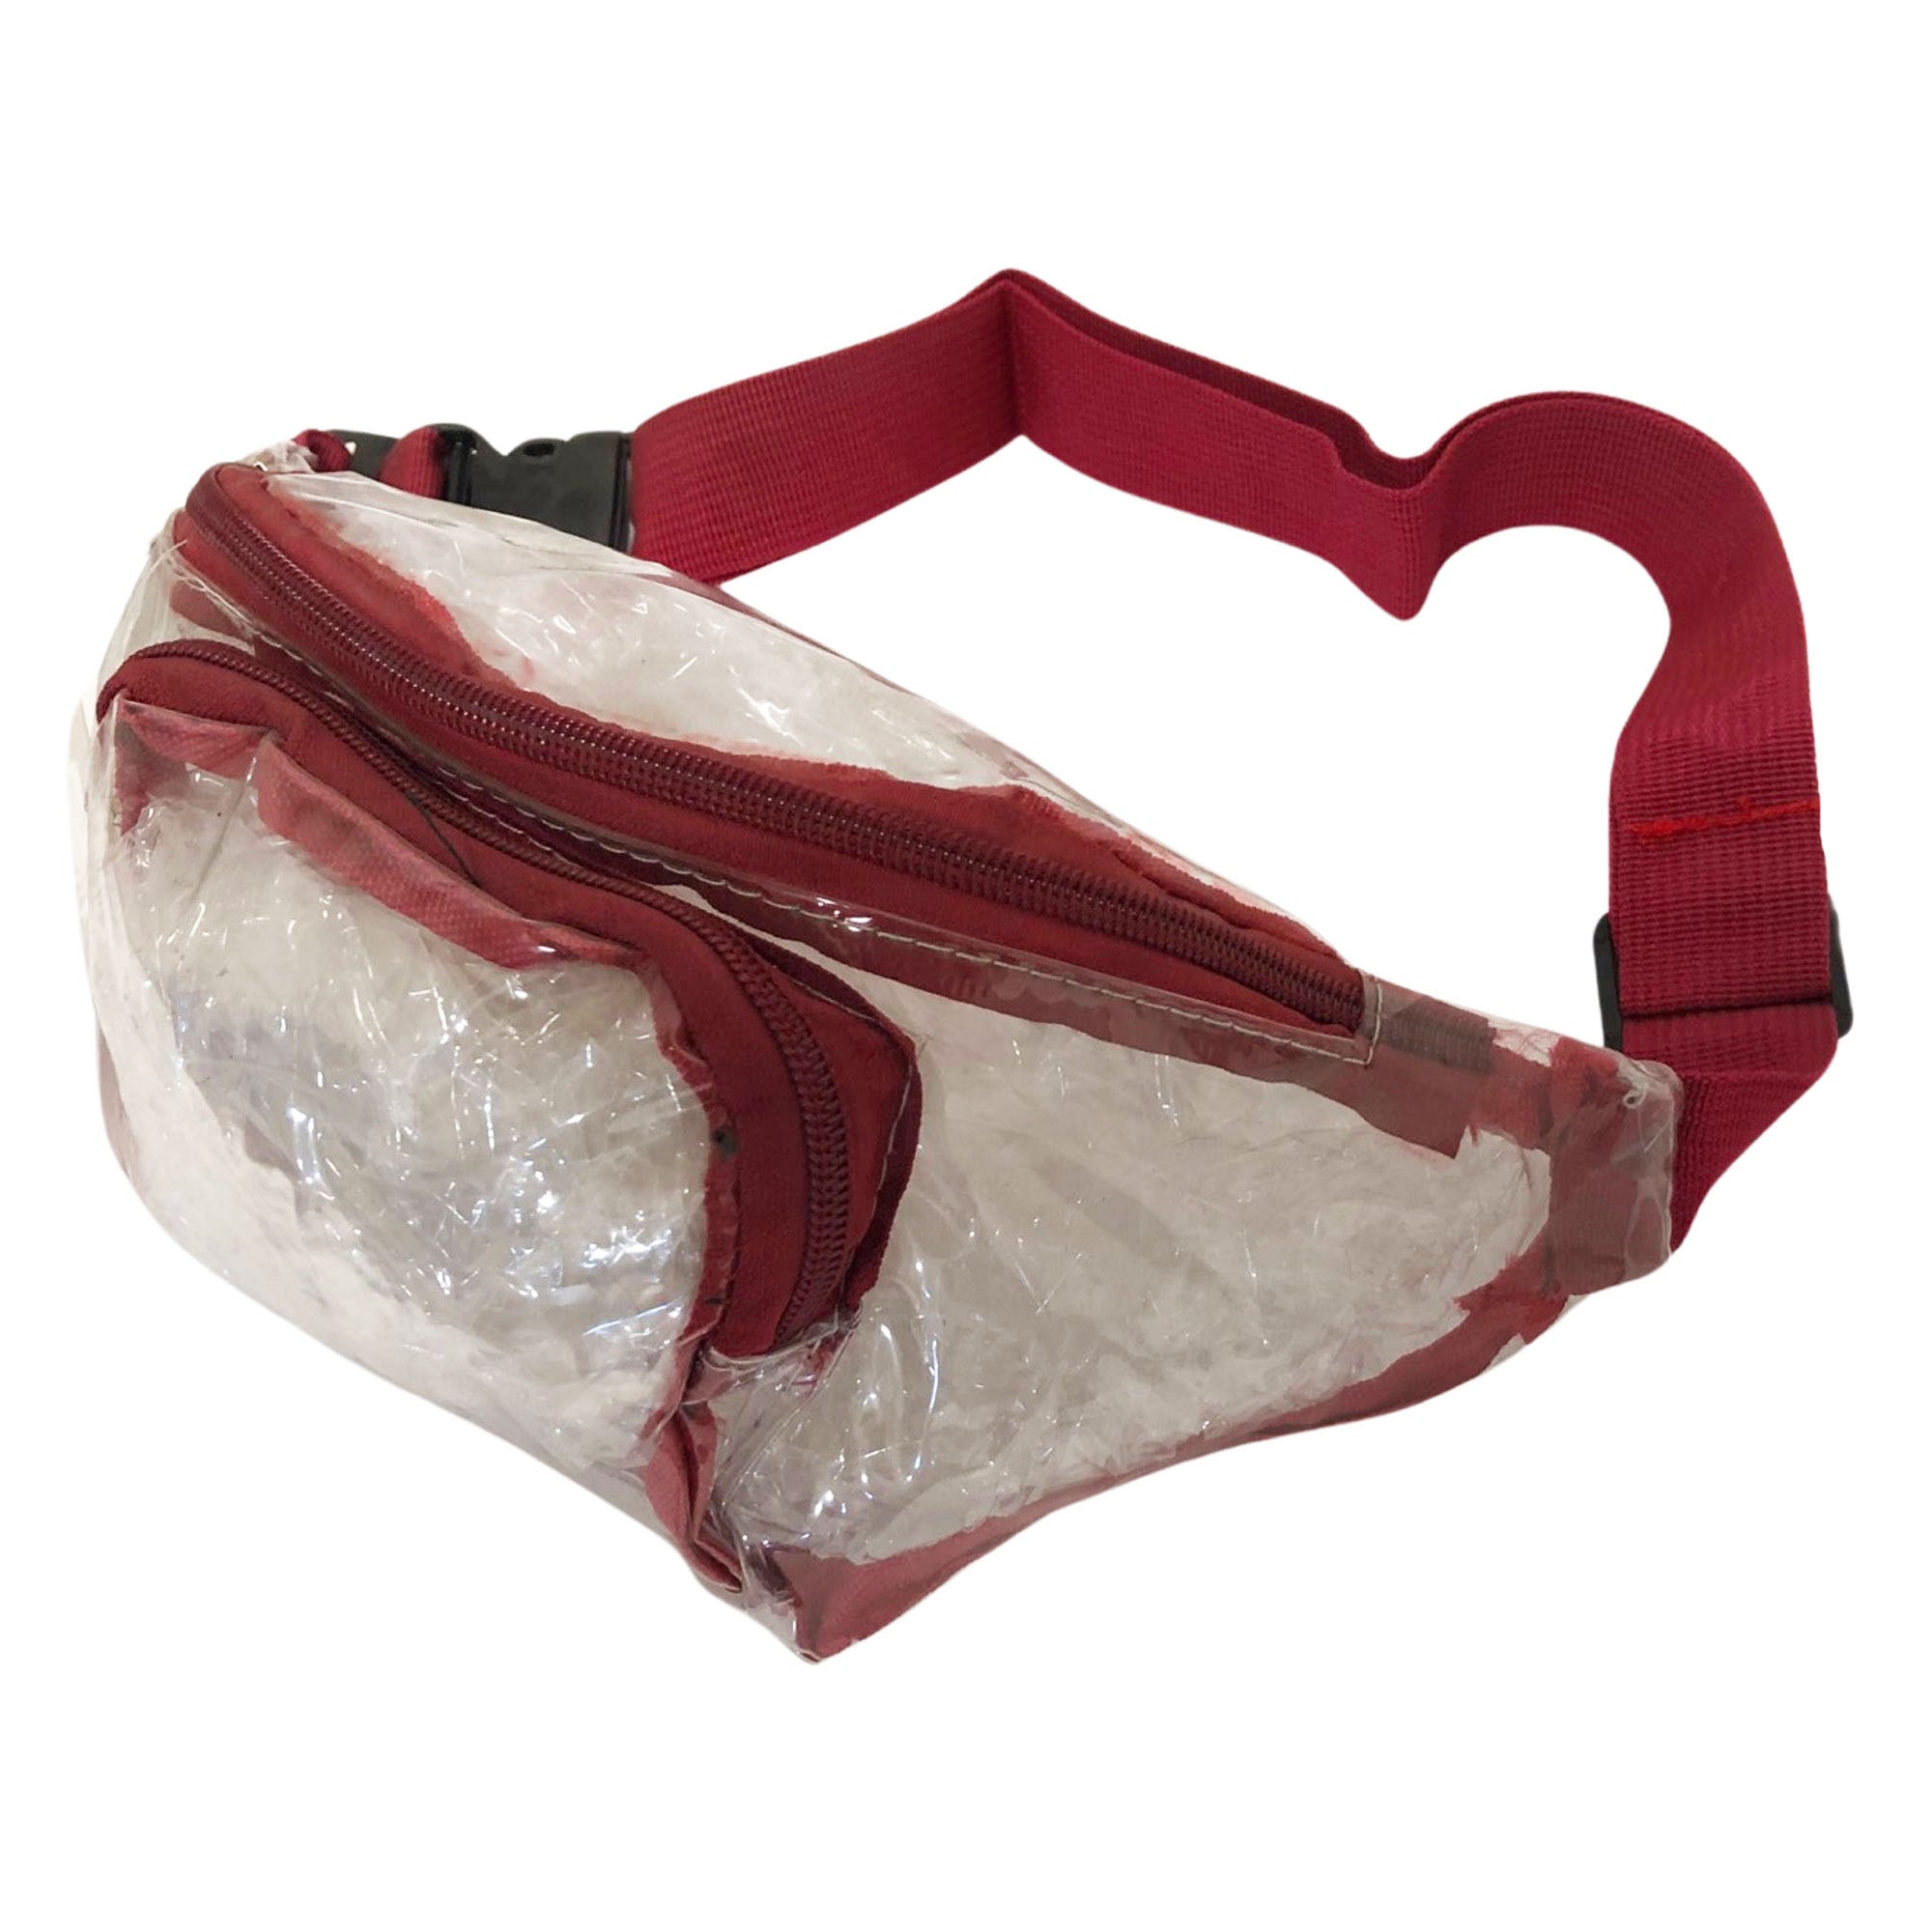 CLEARANCE CLEAR FANNY PACKS (CASE OF 24 - $2.50 / PIECE) - Adults Wholesale Clear Fanny Bags in Burgundy SKU: WP516-PVC BURG-24